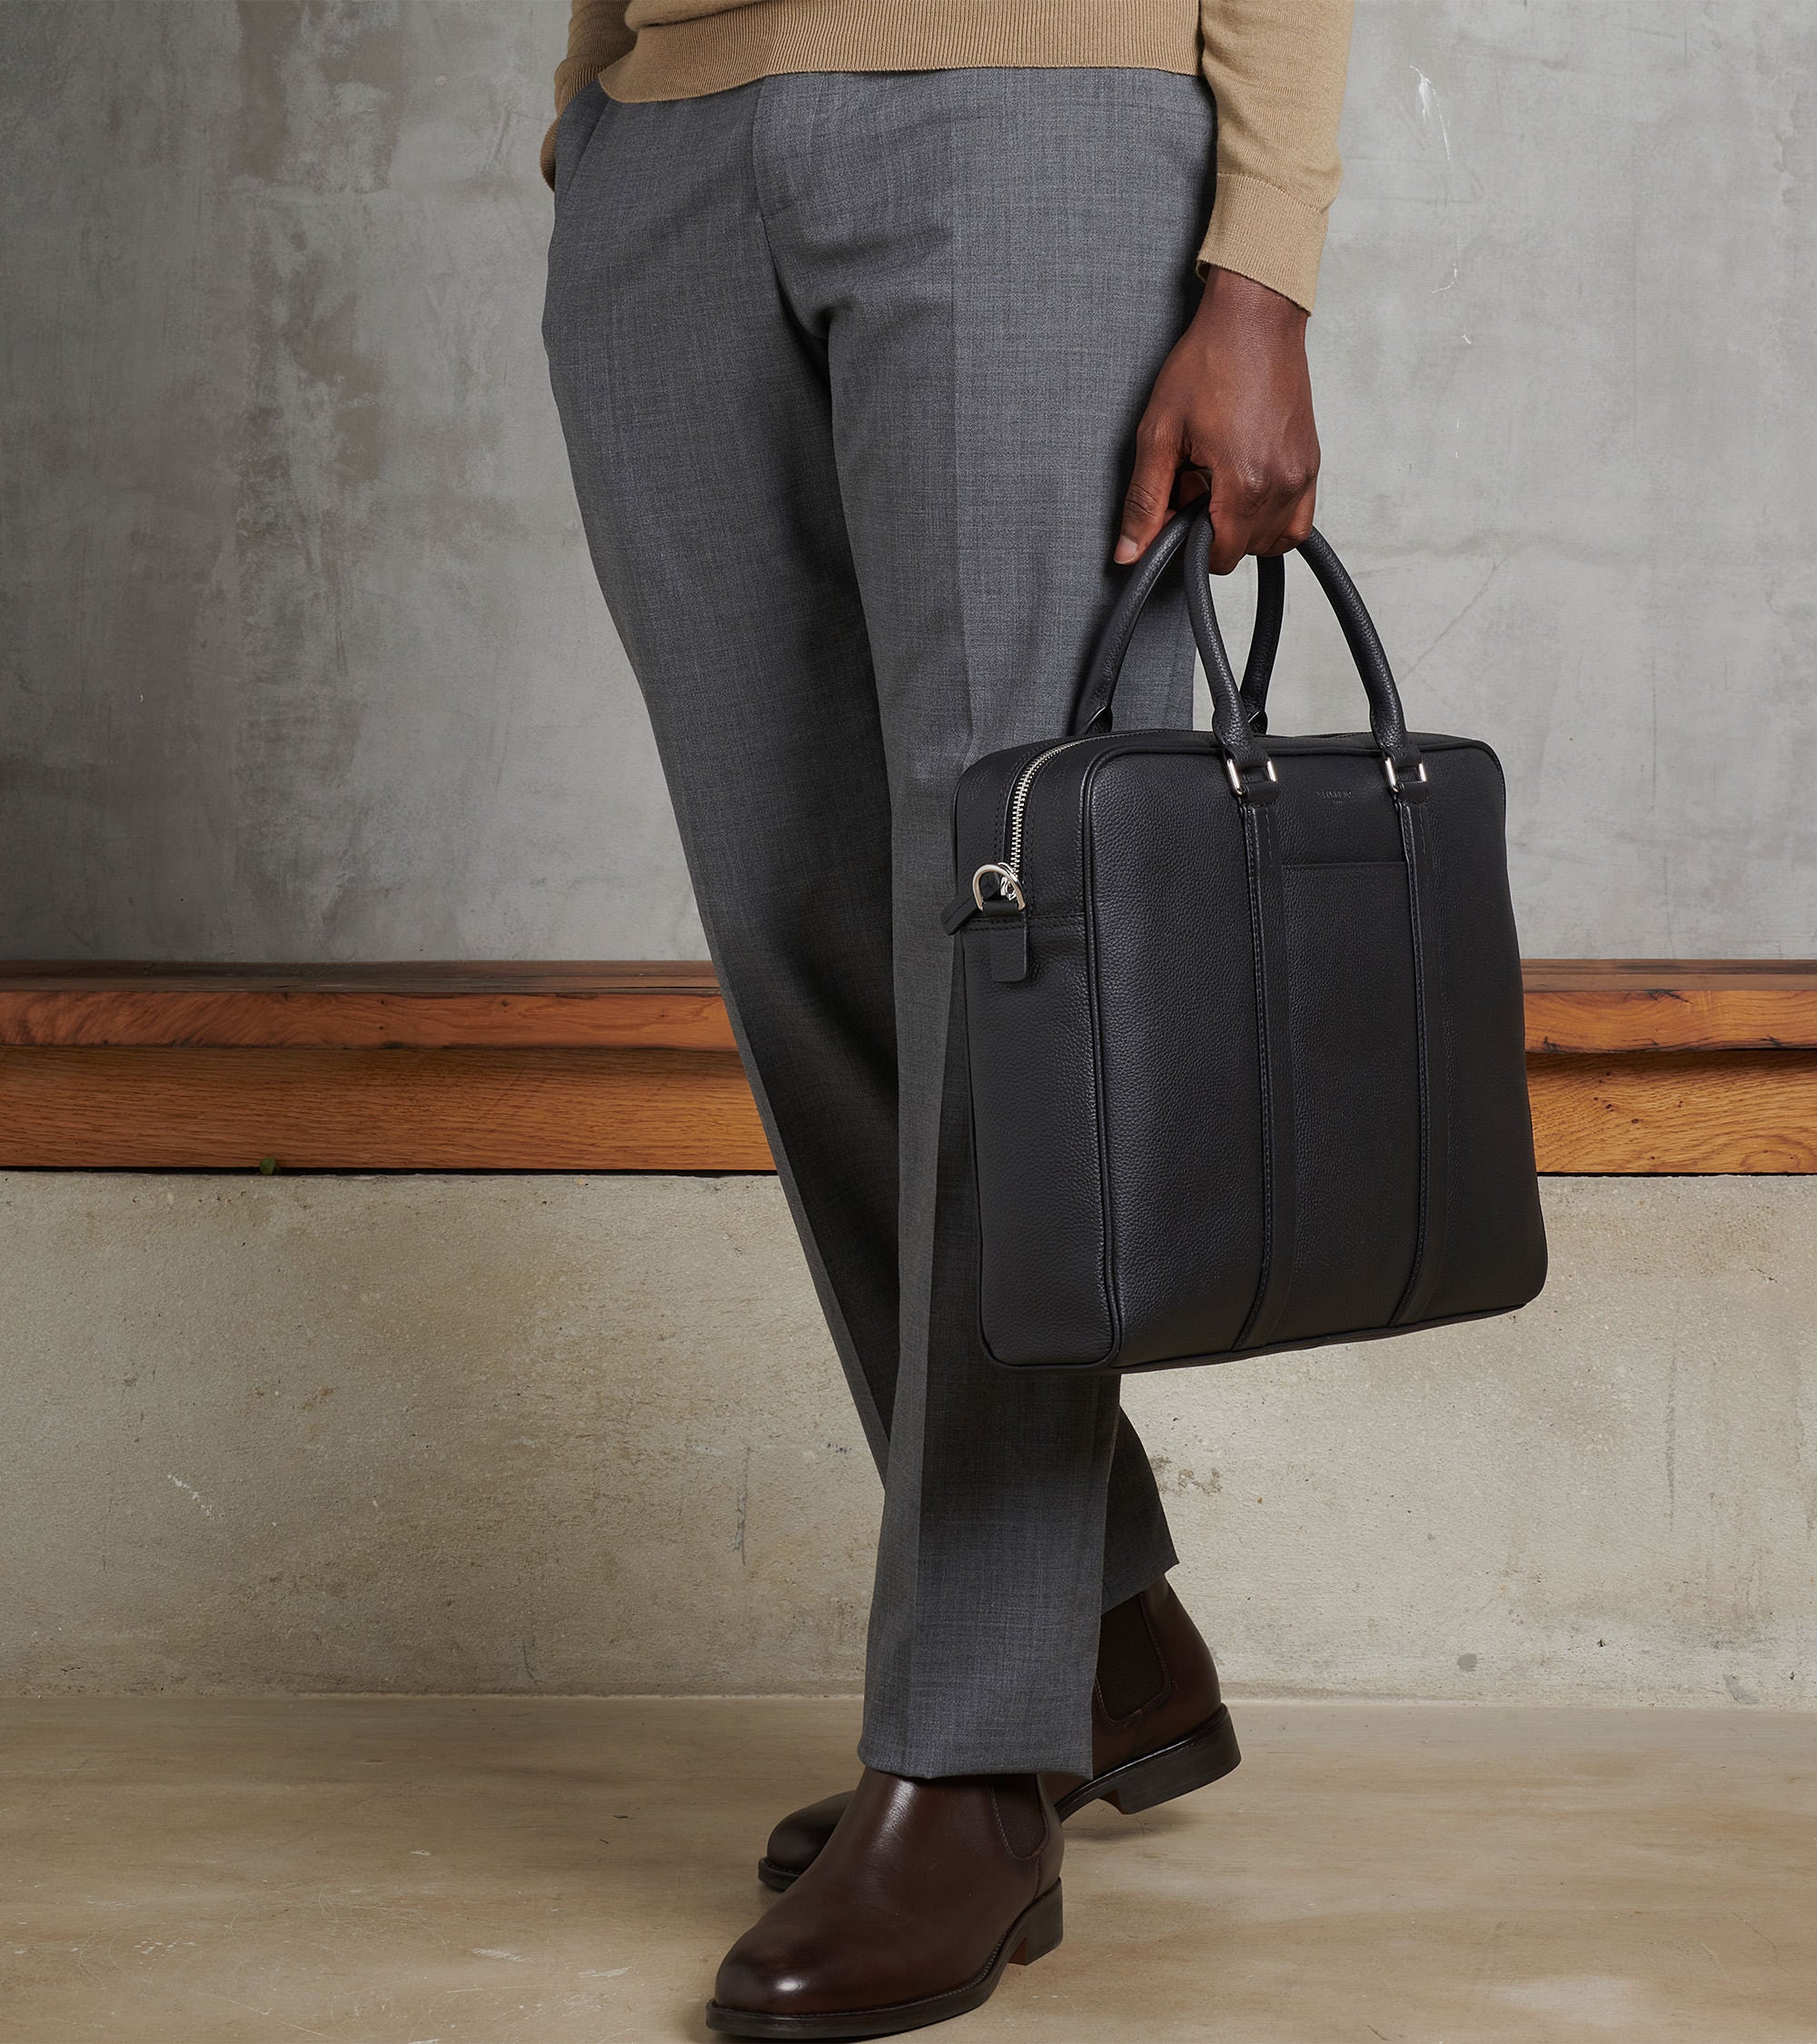 Charles 14" briefcase in grained leather